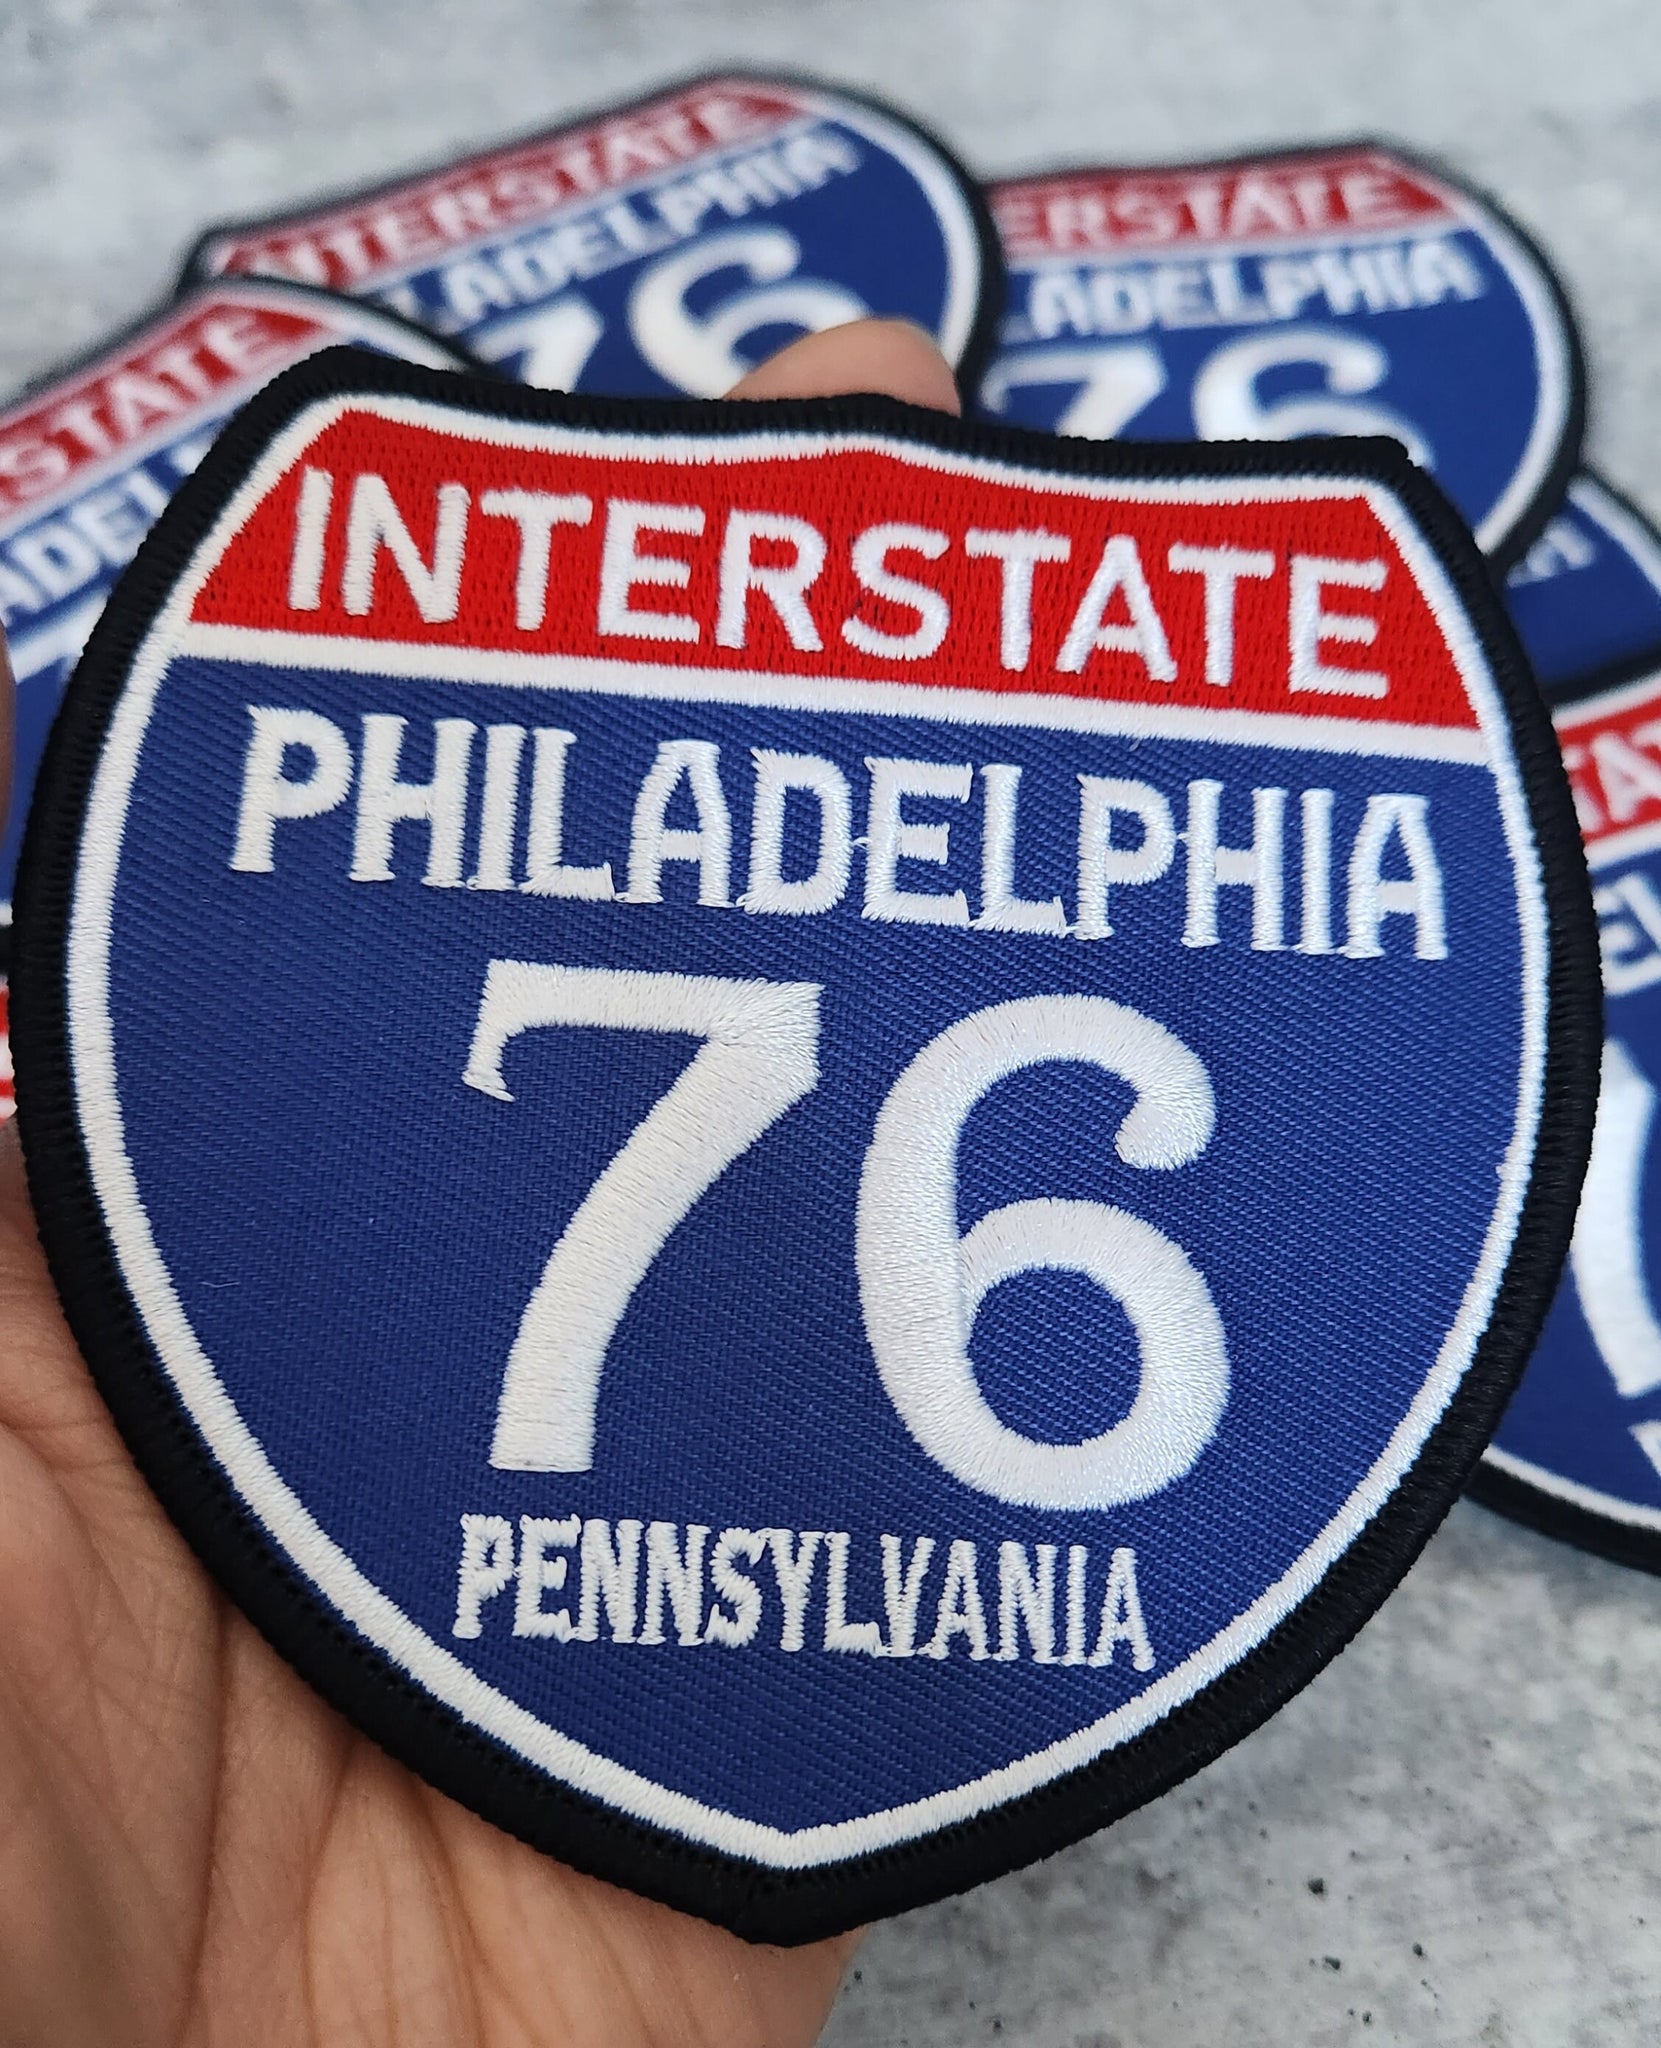 Collectable 1-pc, "PHILADELPHIA 4" Interstate 76"  Iron-On Embroidered Patch; Popular Pennsylvania Emblem, Red/White/Blue Badge, Patch for J